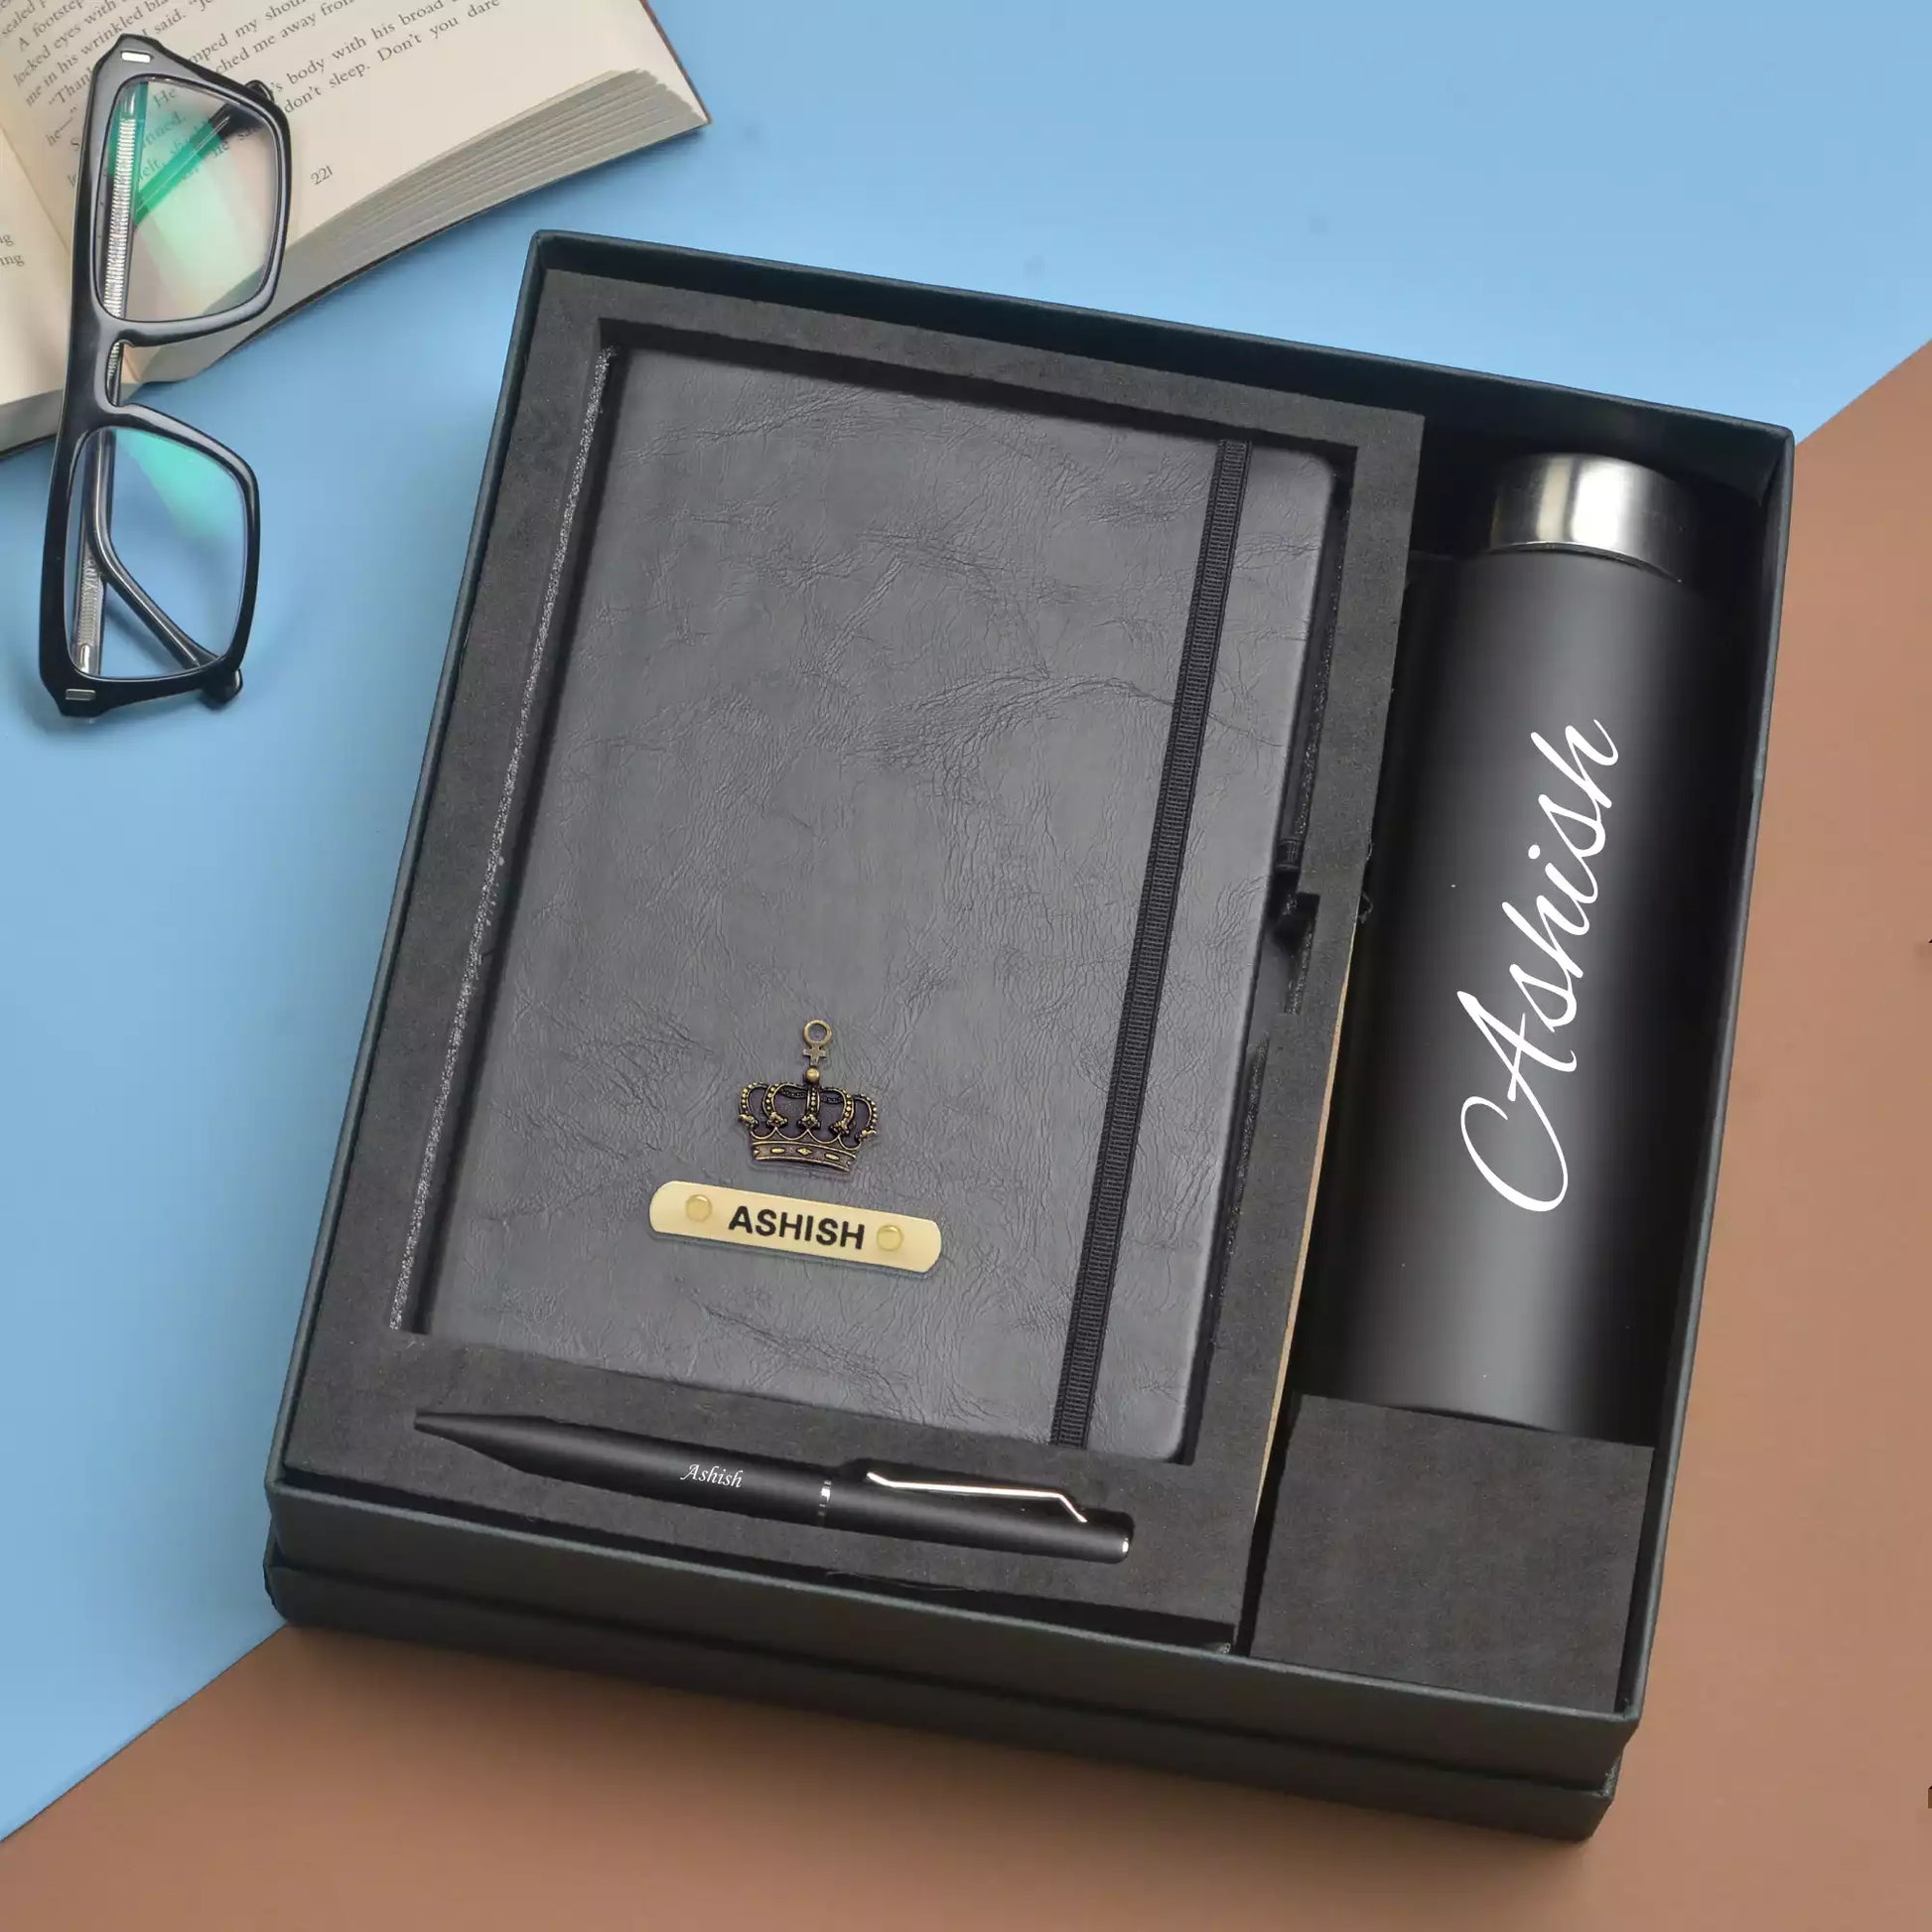 Our Classy Hardcover Diary, Classic Metal Pen, and Classic Smart Bottle 900 ml make for the perfect combination of form and function. The diary's sleek design, paired with the pen and bottle's classic styles, make for the ultimate set for any busy professional or student.